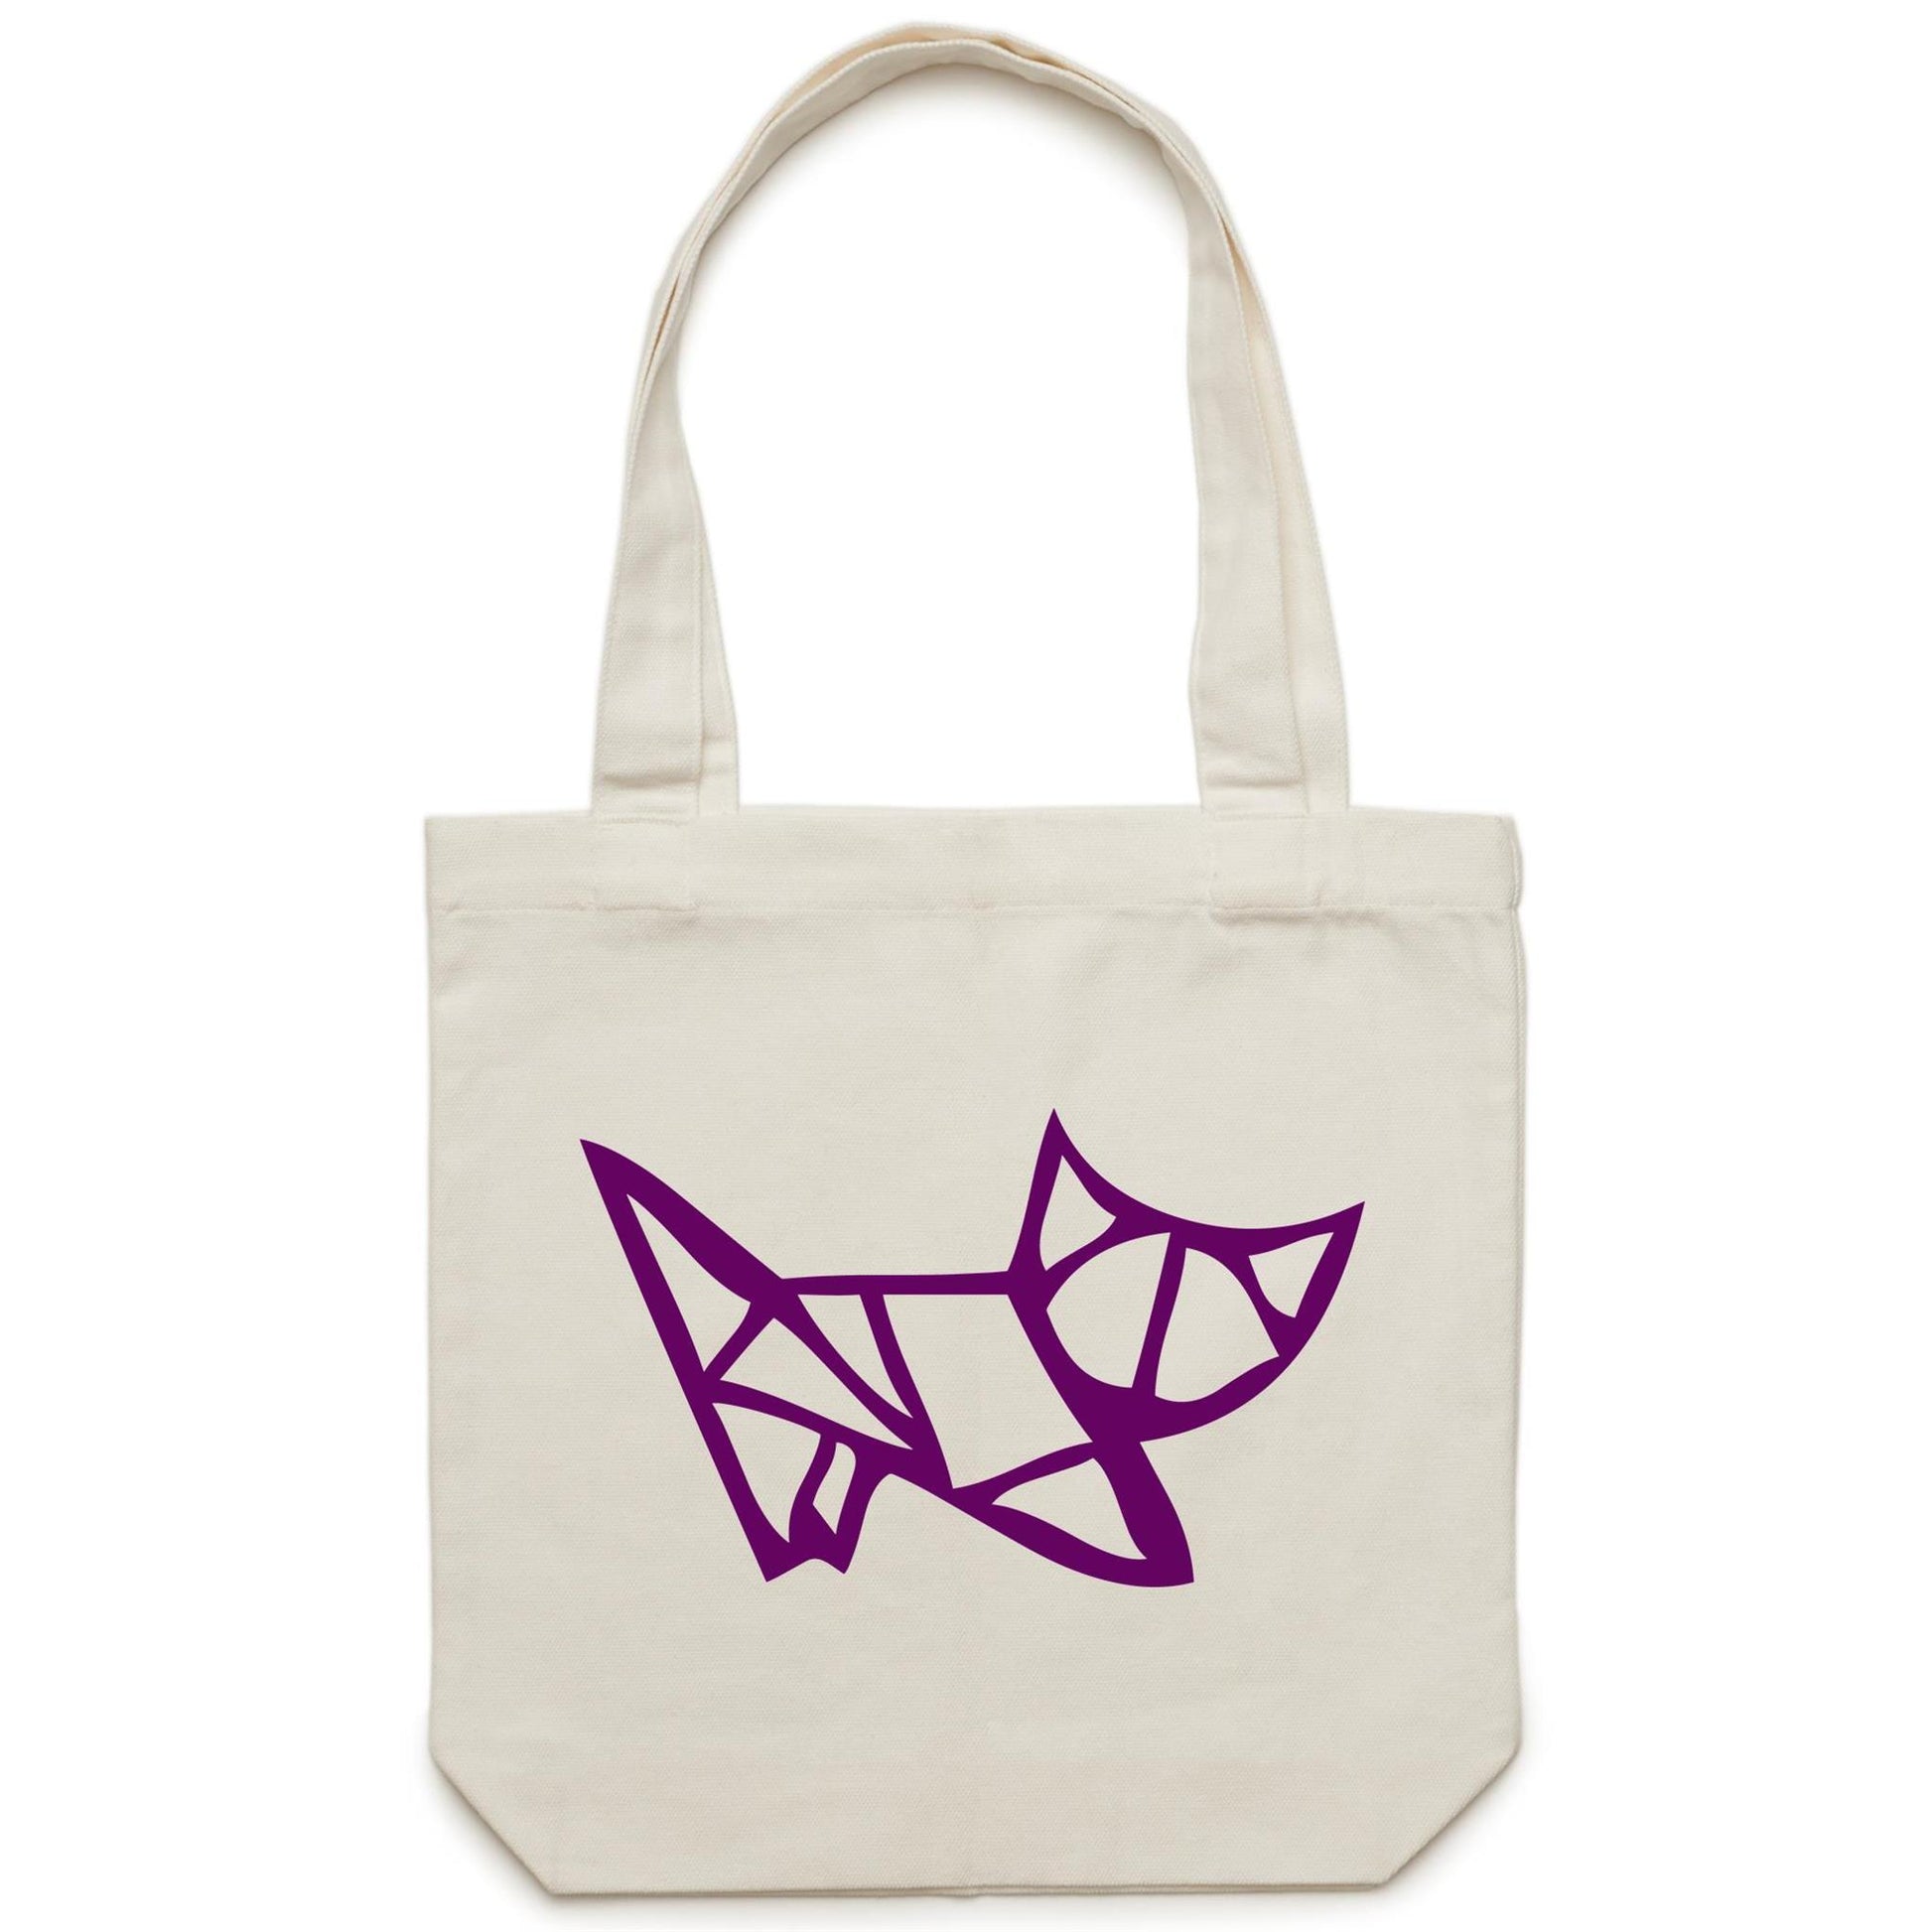 Origami Kitten - Canvas Tote Bag Cream One-Size Tote Bag animal